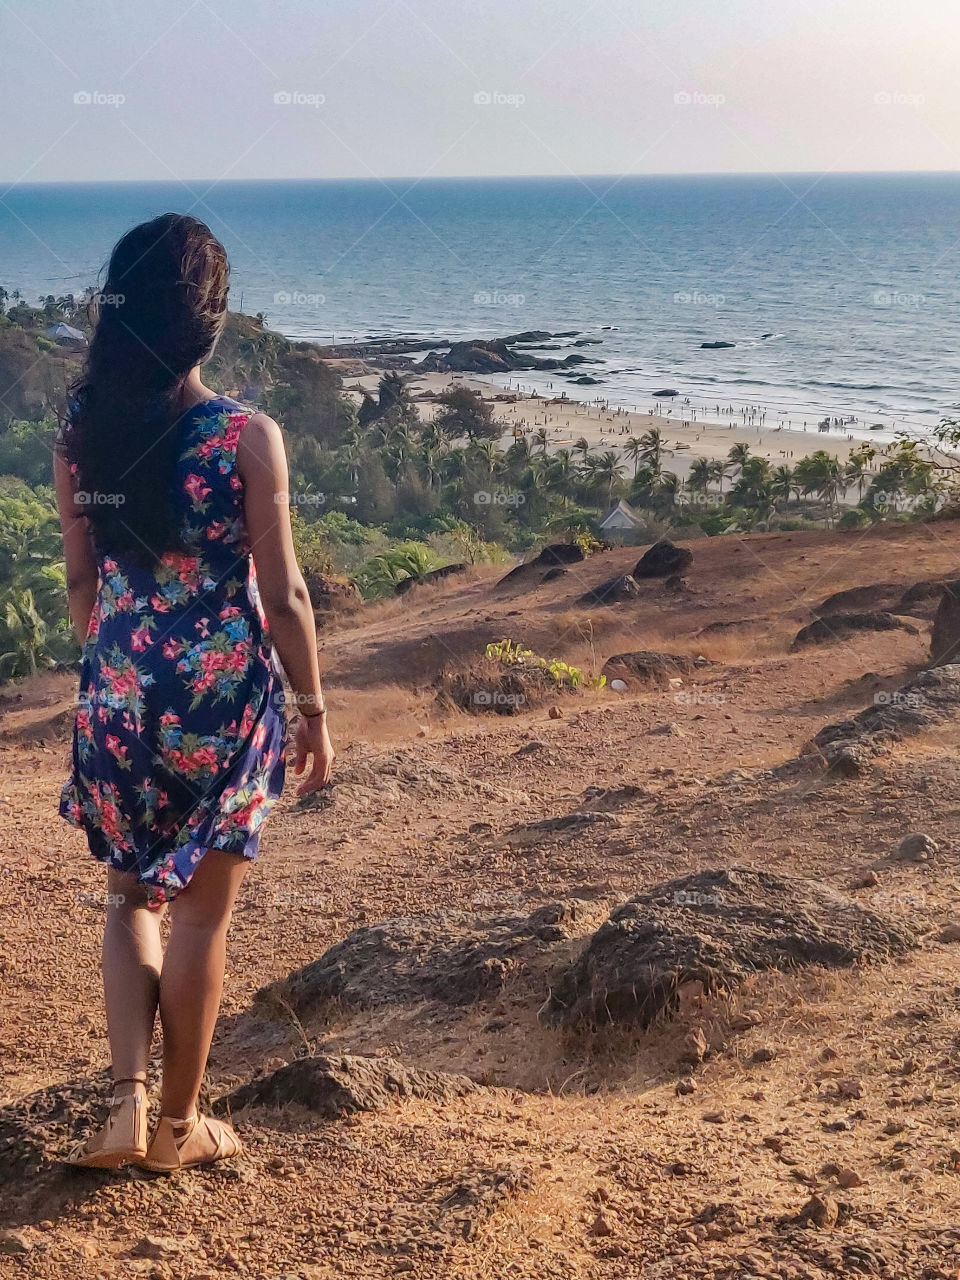 Chapora Fort is a pleasant place to wander that offers fantastic views north across the Chapora river to Pernem, south over Vagator and also far out to the Arabian Sea in the West. interesting to see tiny humans in this big world. isn't it? 🙂